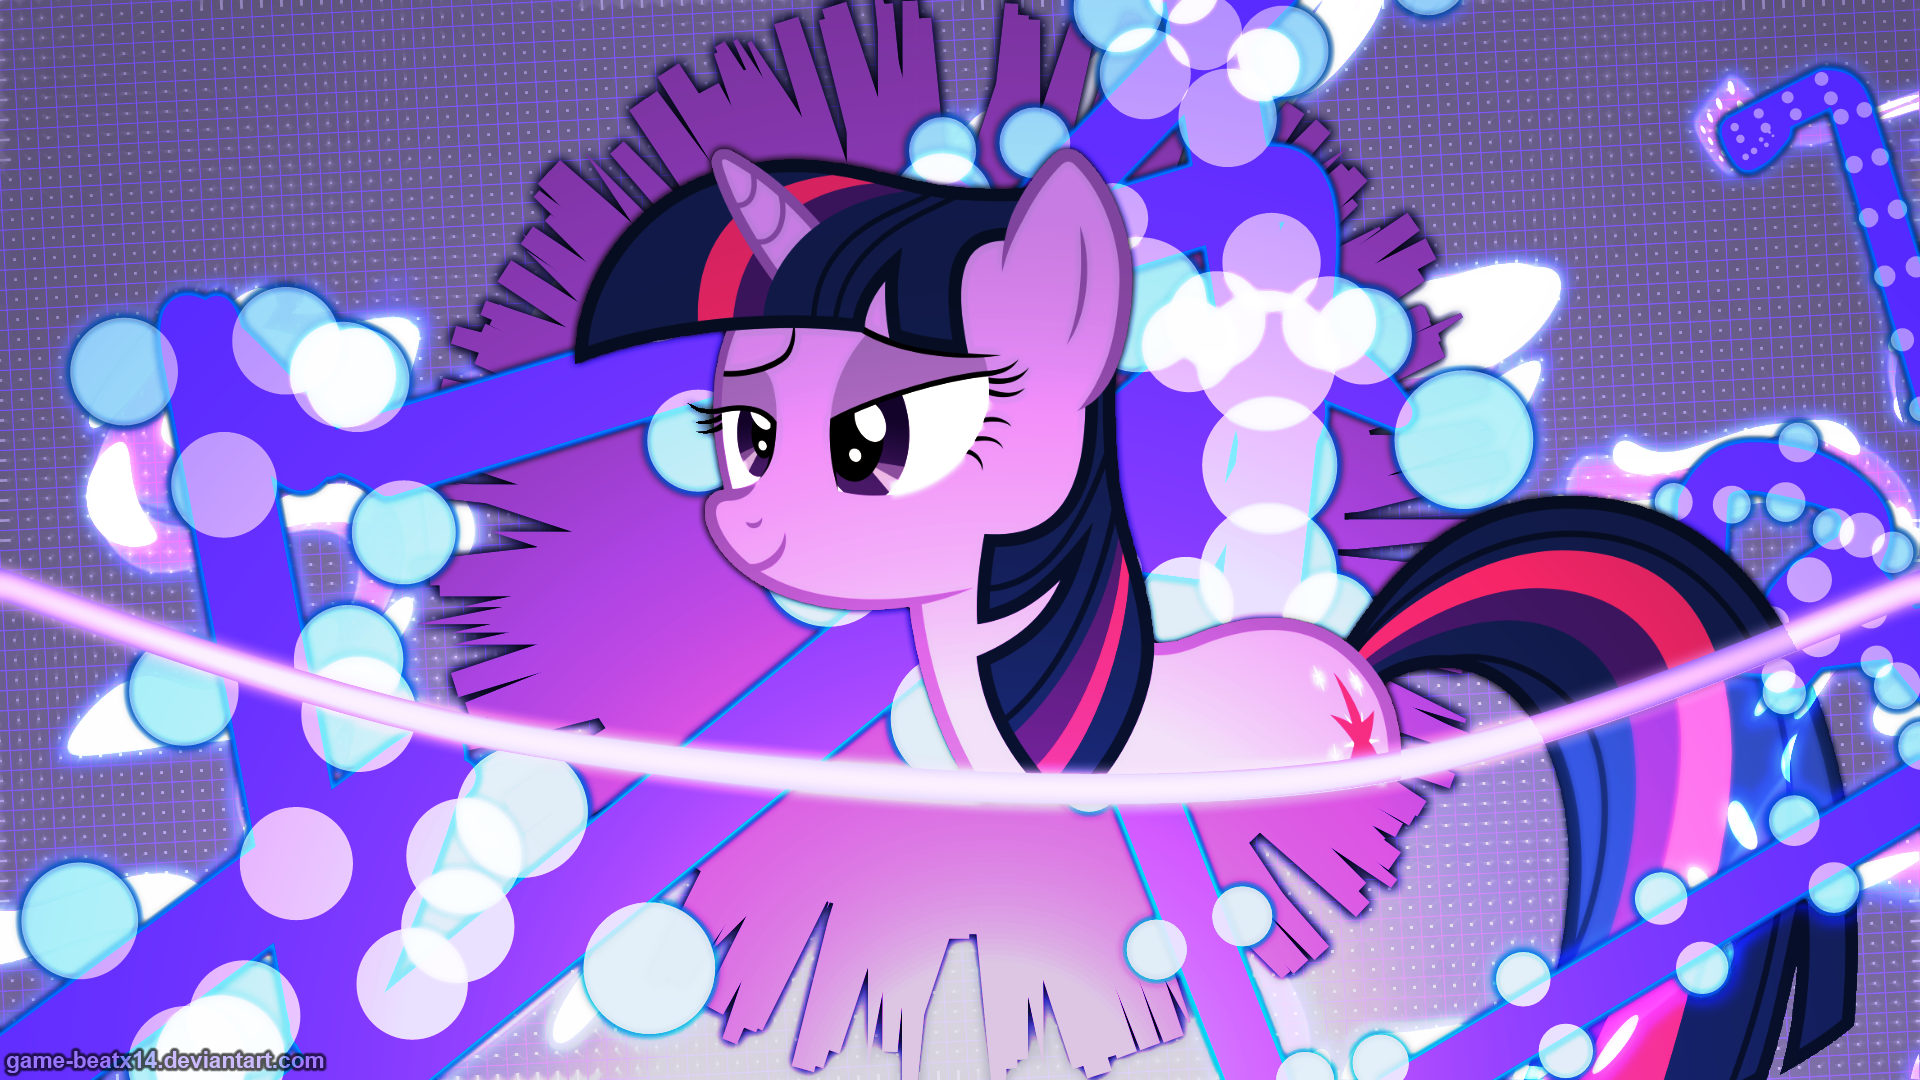 Twilight Sparkle Wallpaper 2 by Game-BeatX14 and mehoep